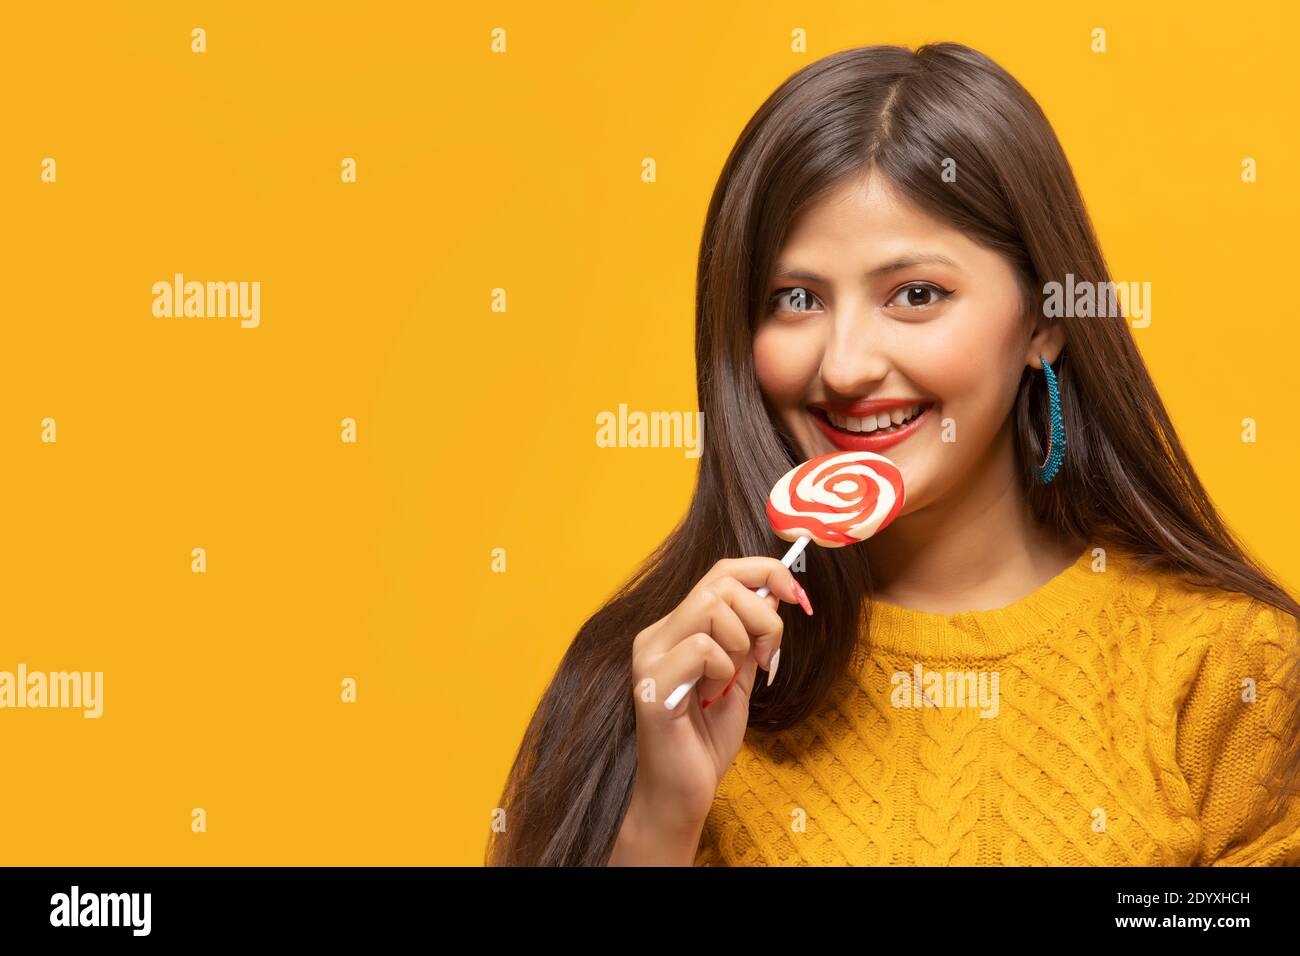 Portrait of a young woman holding a lollipop in hand Stock Photo